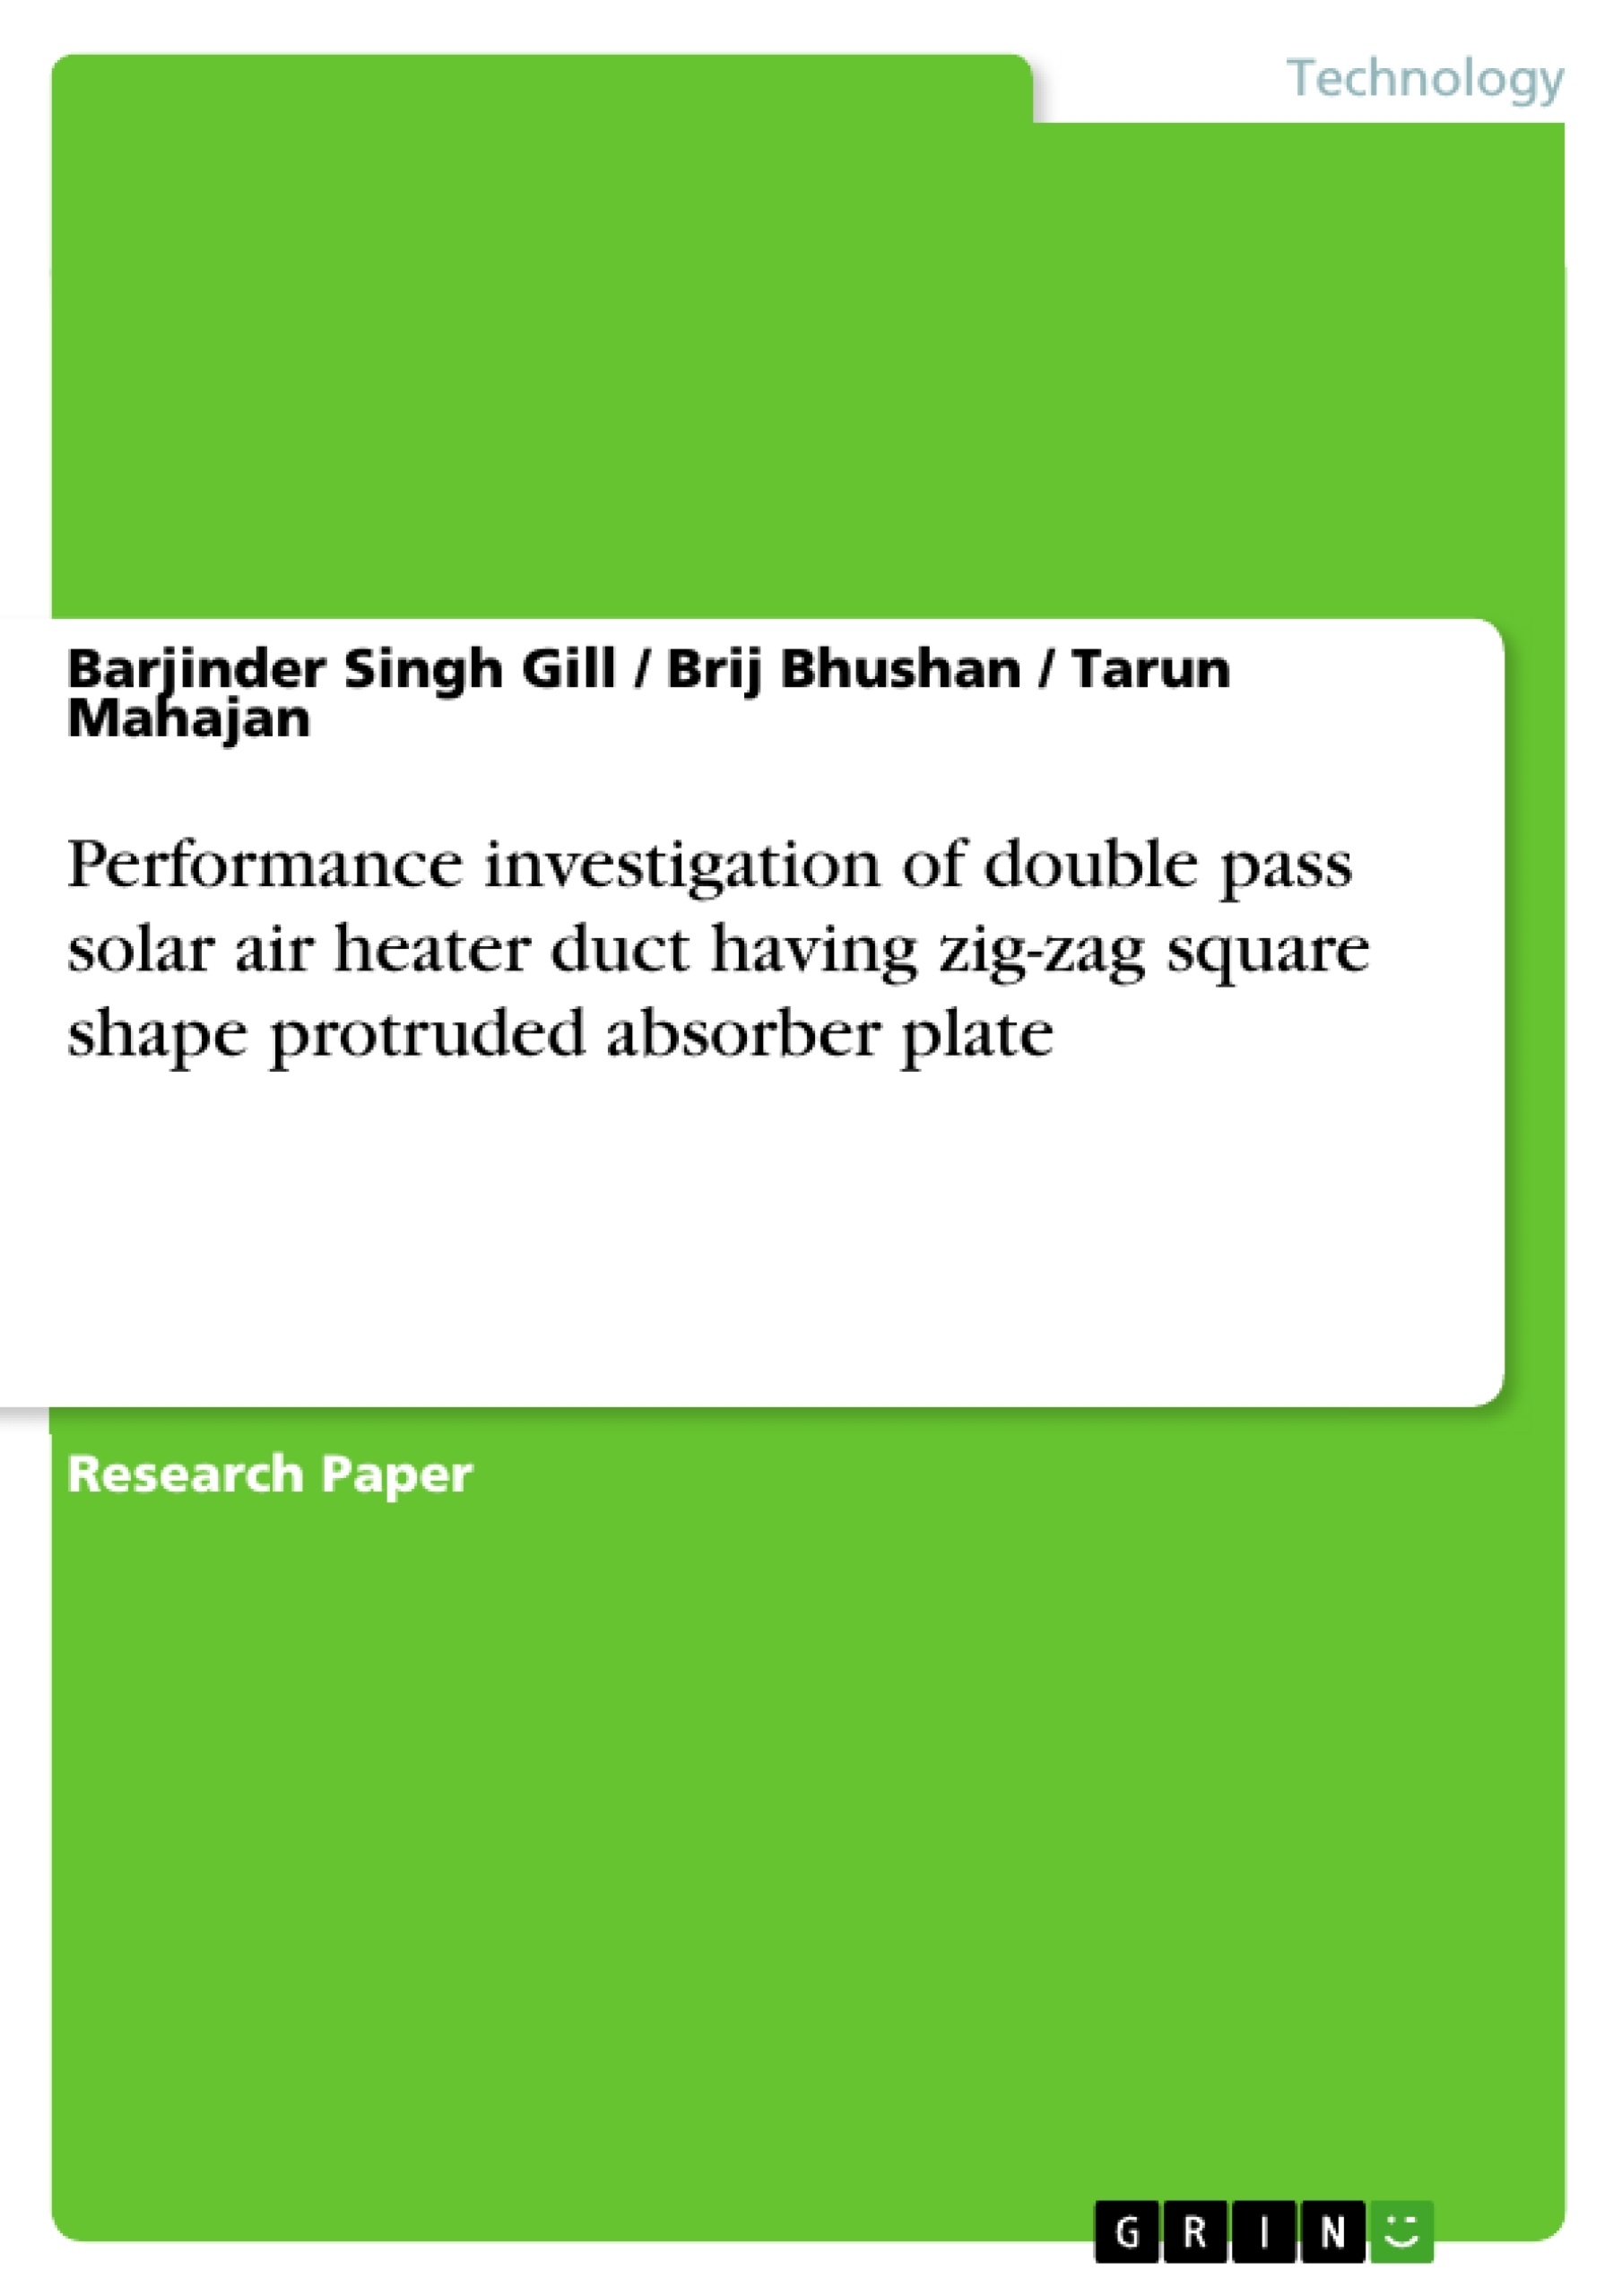 Titre: Performance investigation of double pass solar air heater duct having zig-zag square shape protruded absorber plate